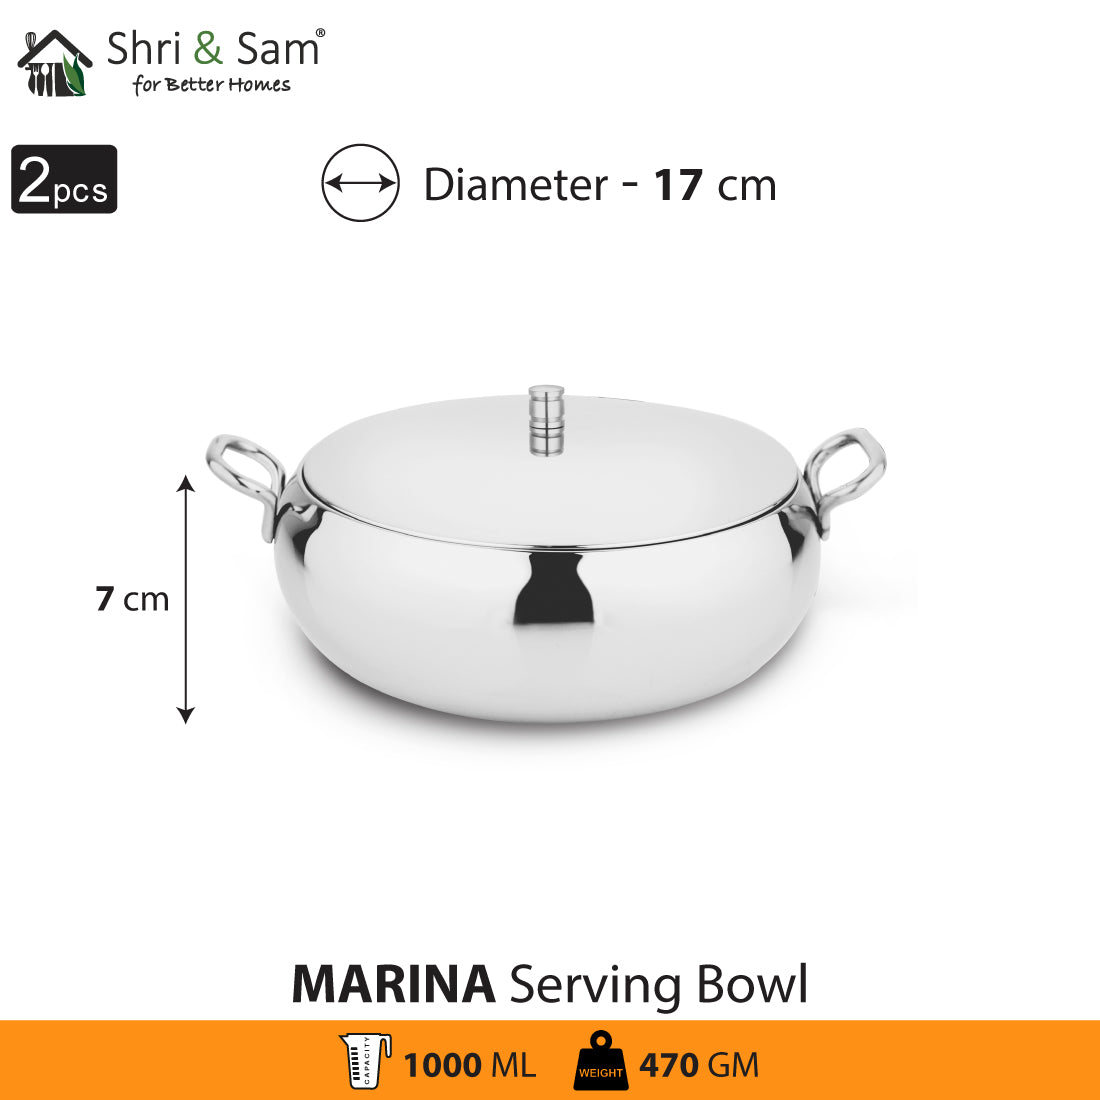 Stainless Steel 2 PCS Serving Bowl with SS Lid Marina